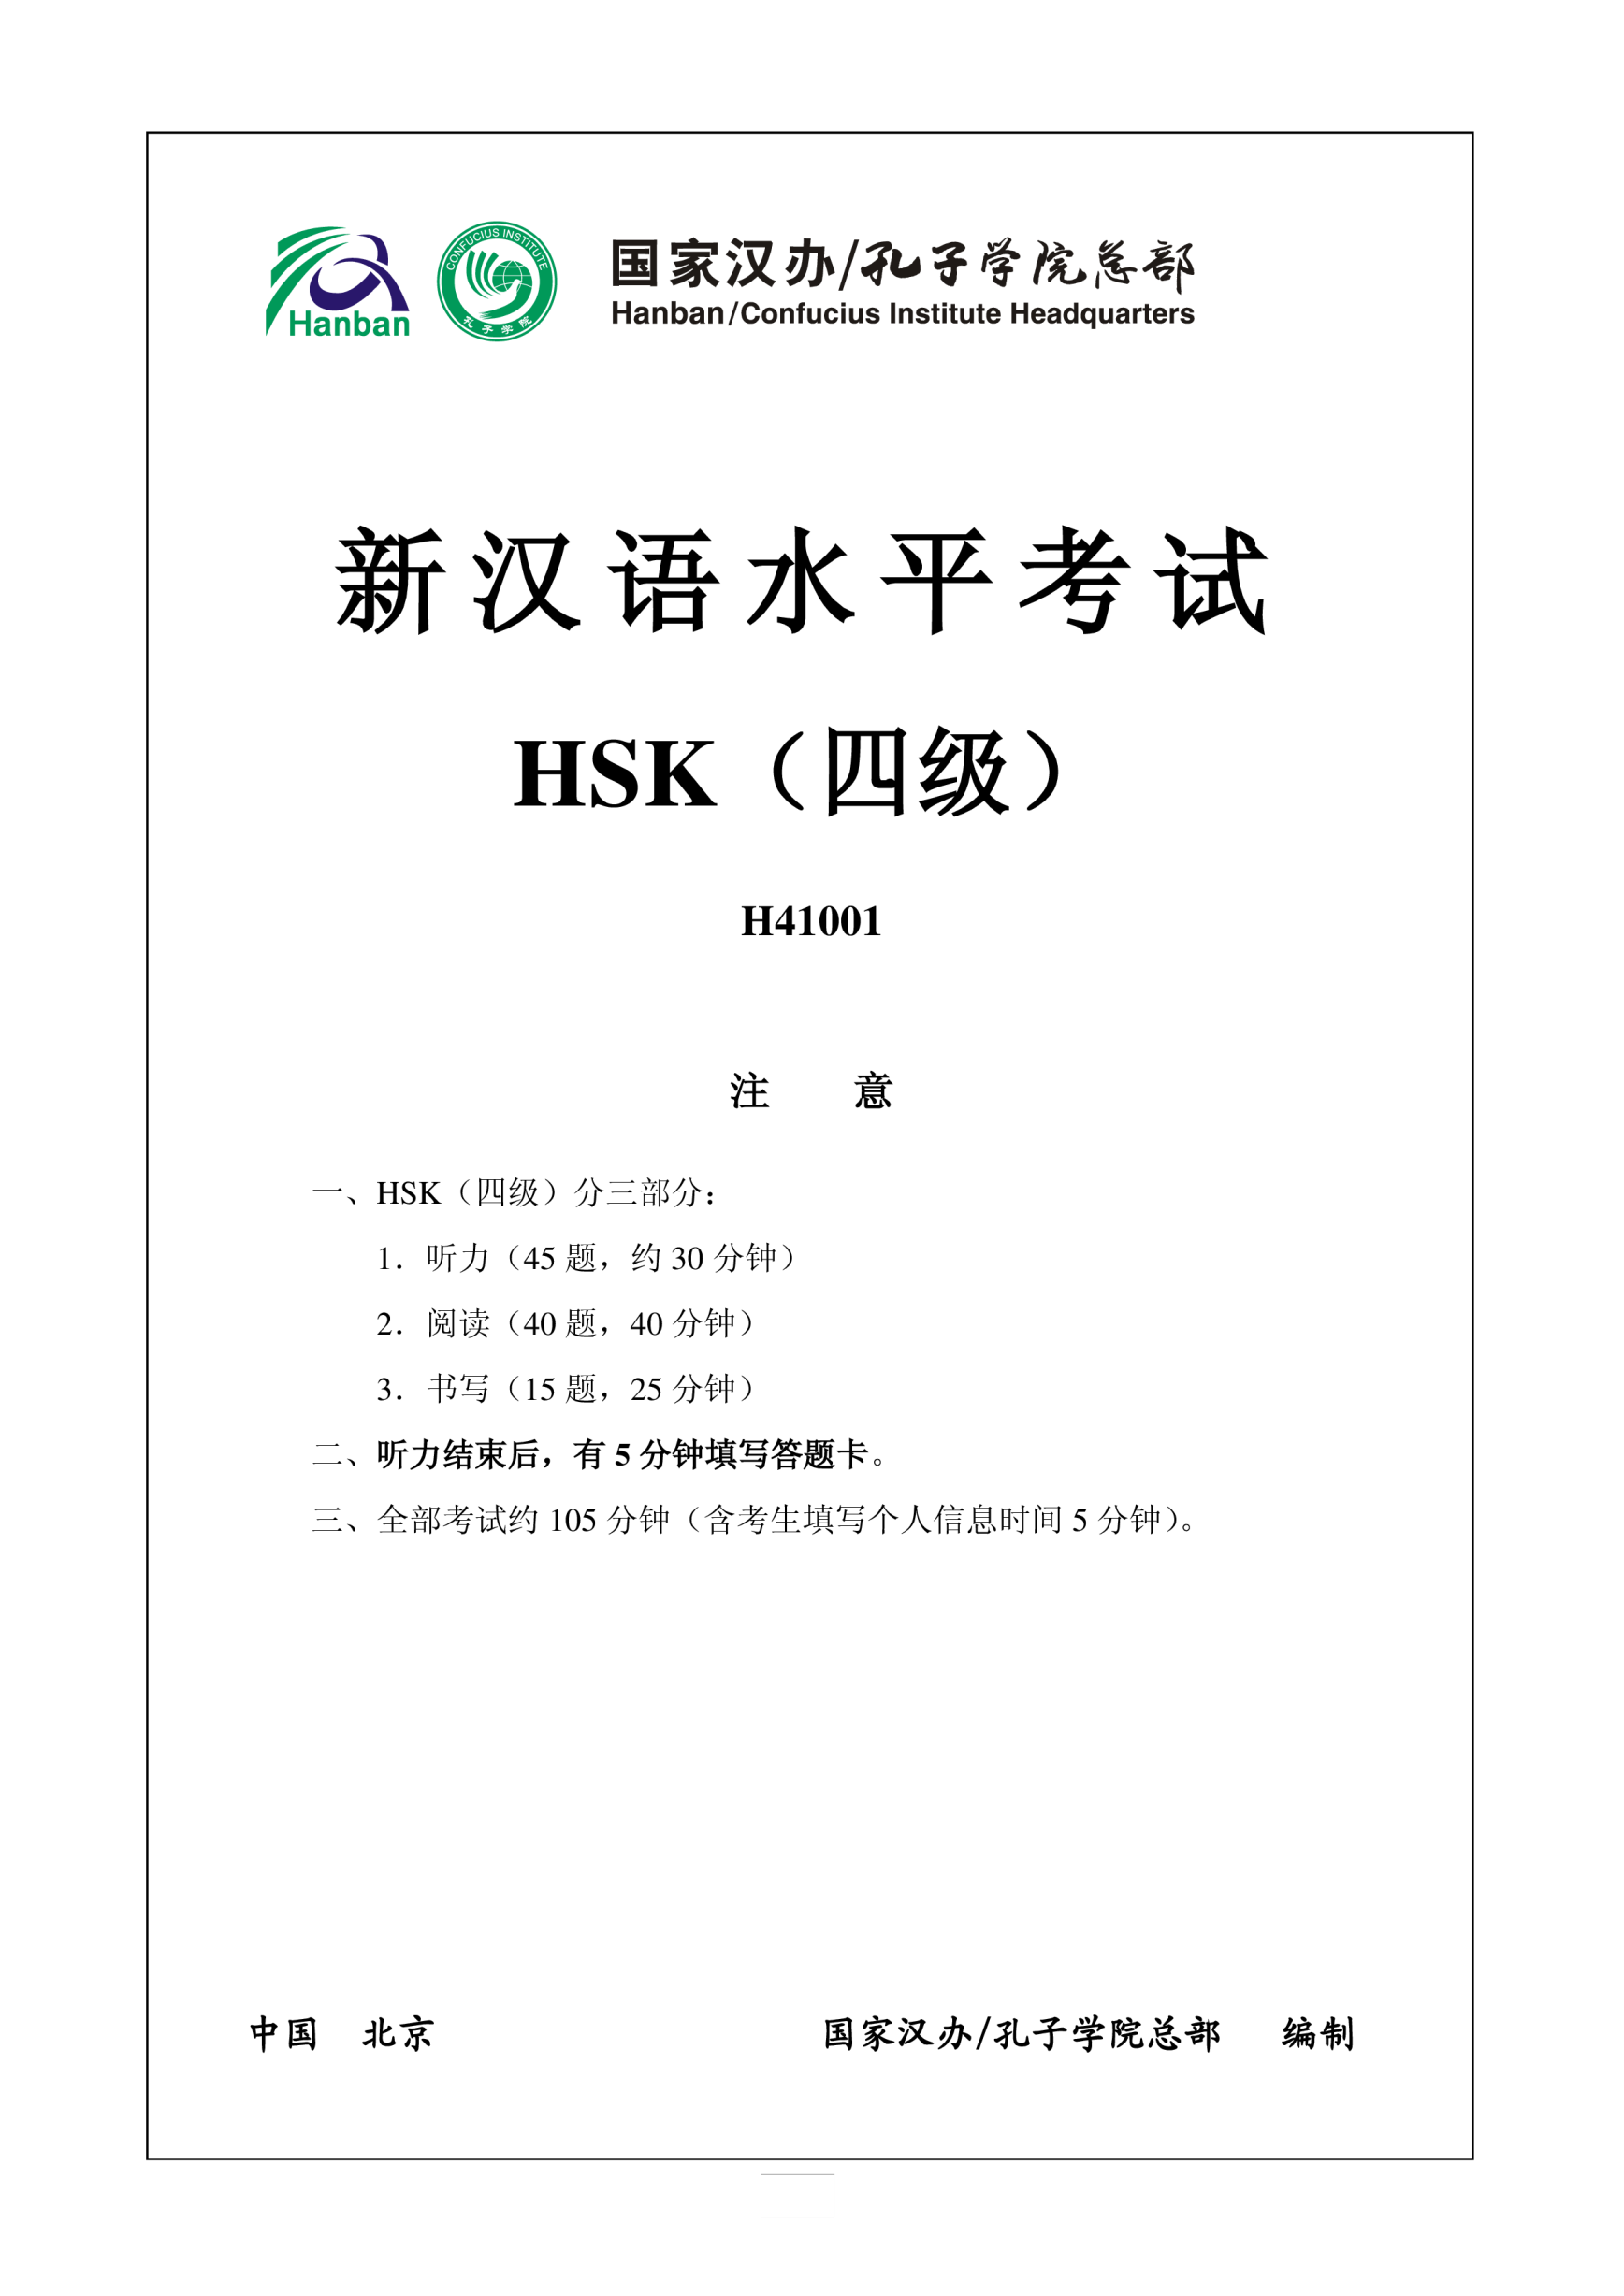 template preview imageHSK4 Chinese Exam including Answers # HSK H41001